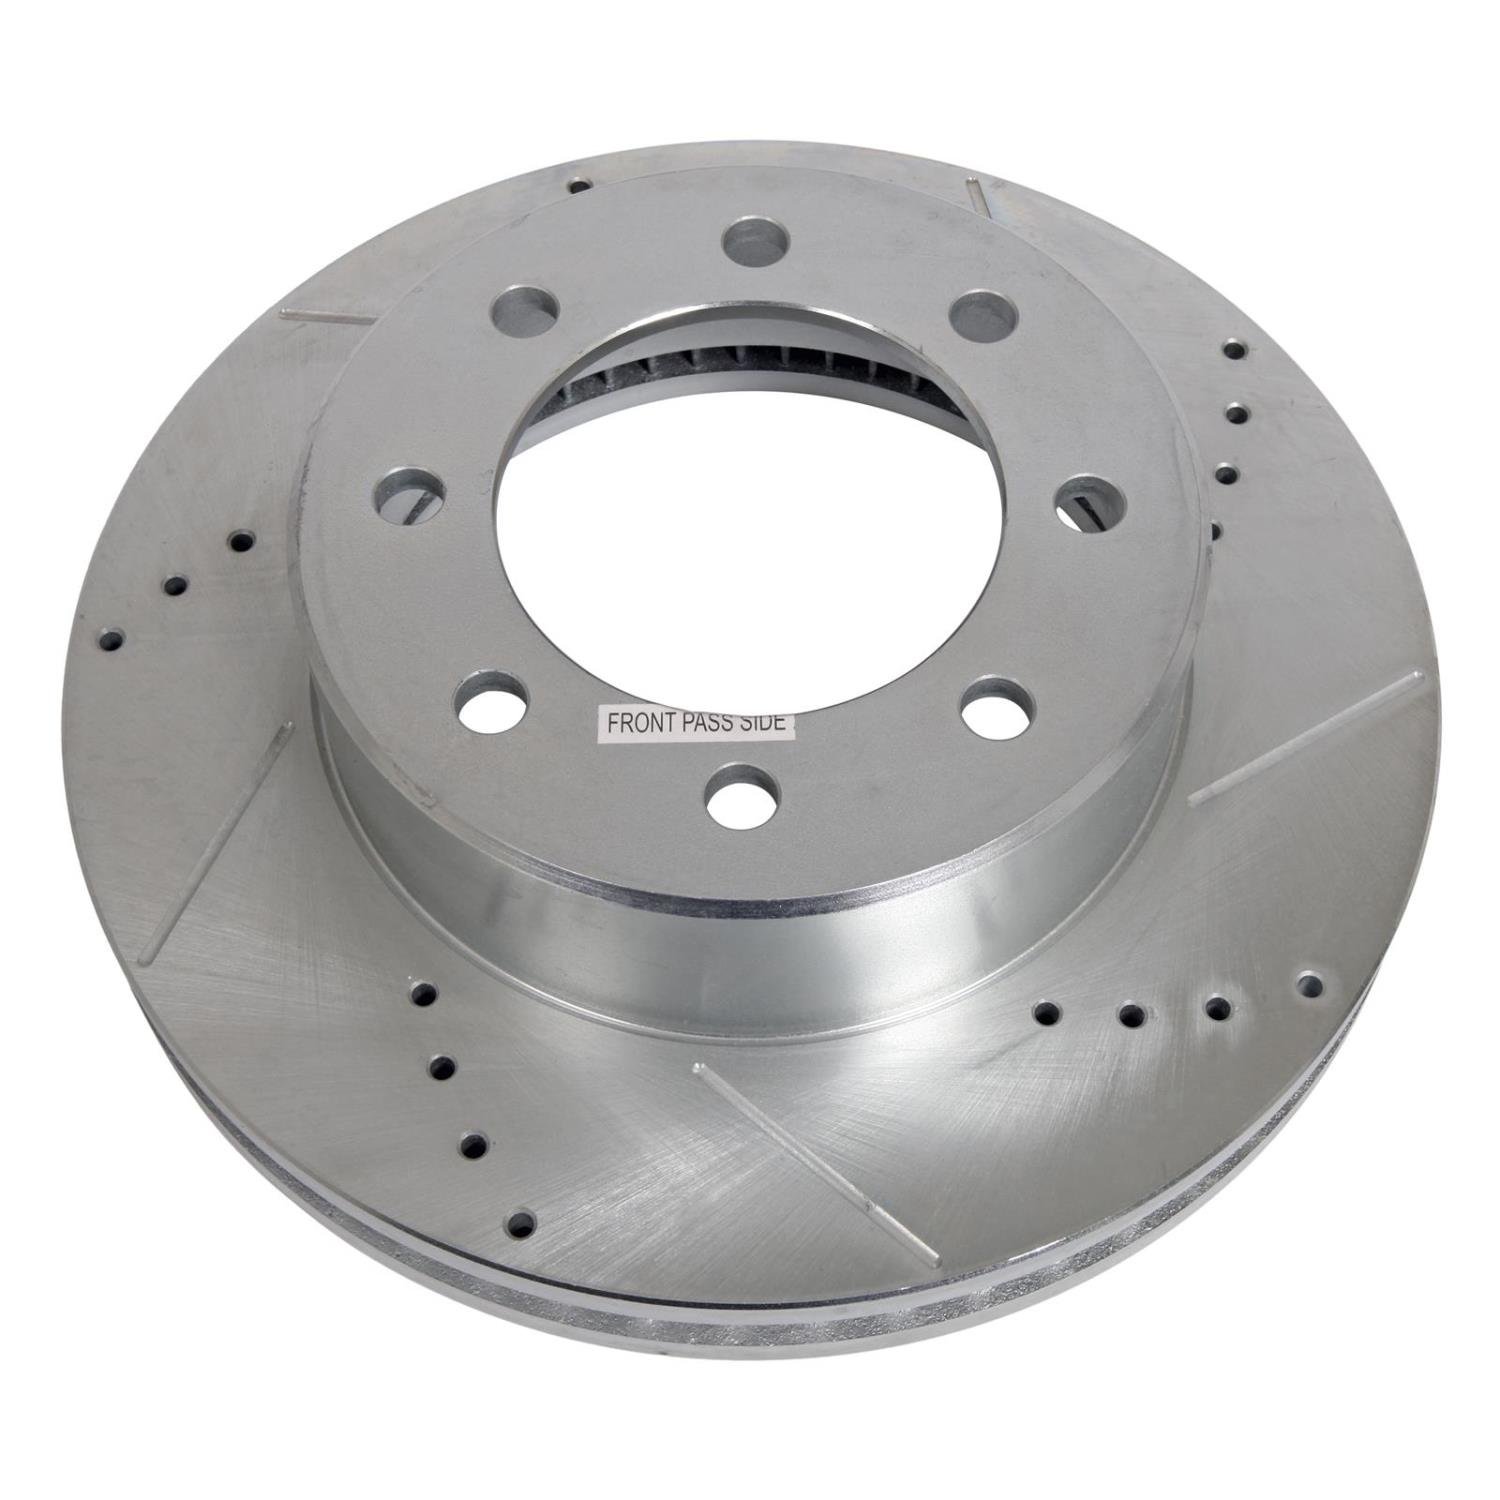 Extreme Performance Drilled And Slotted Brake Rotor Fits Select Late Model Dodge Trucks [Front Right/Passenger Side]